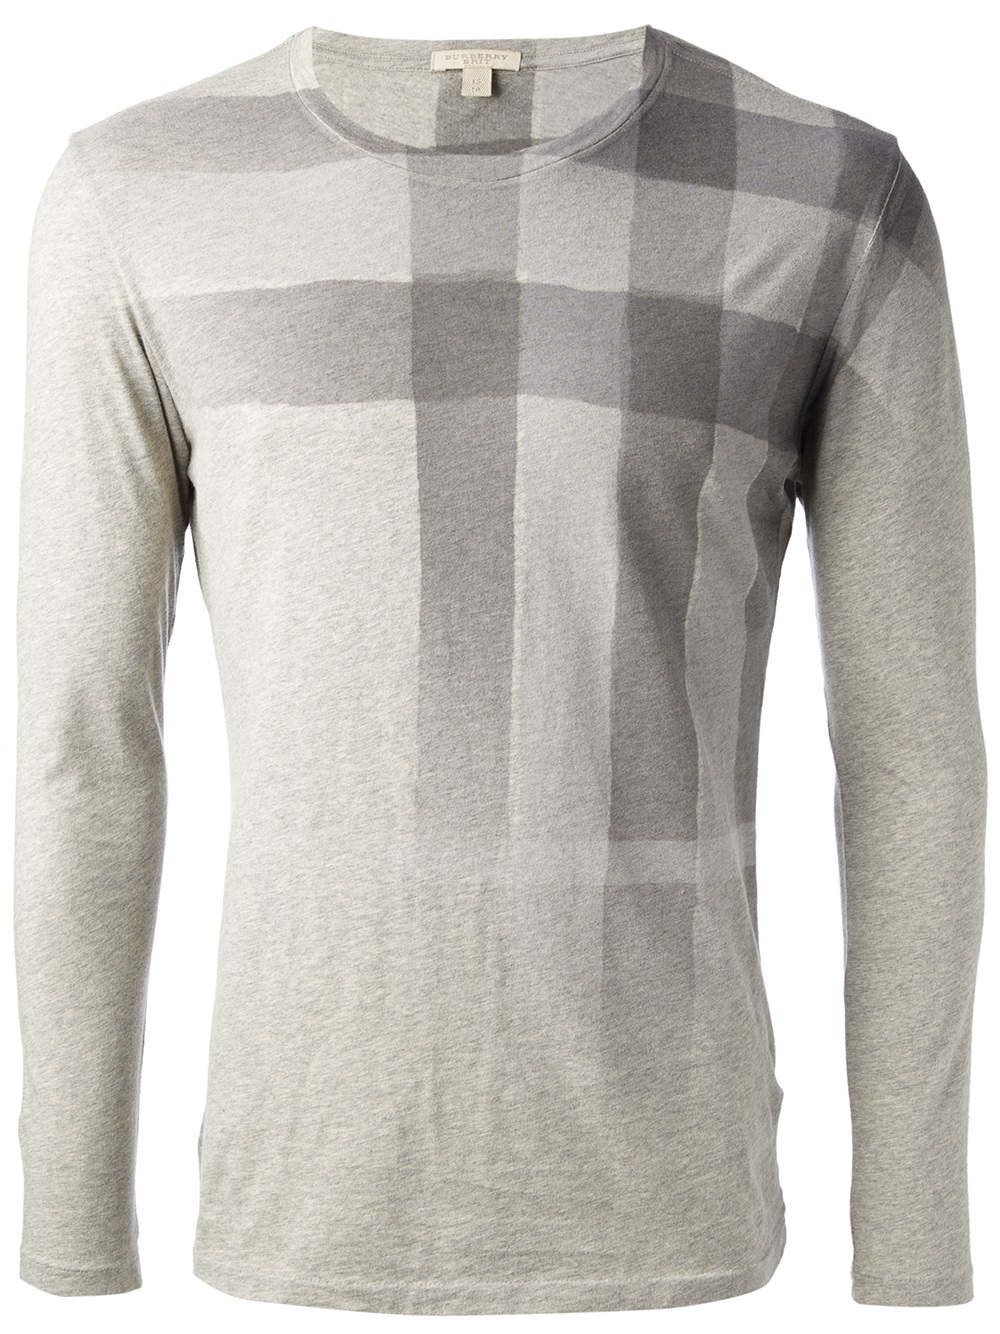 Burberry Brit Long Sleeve Tshirt in Grey (Natural) for Men - Lyst